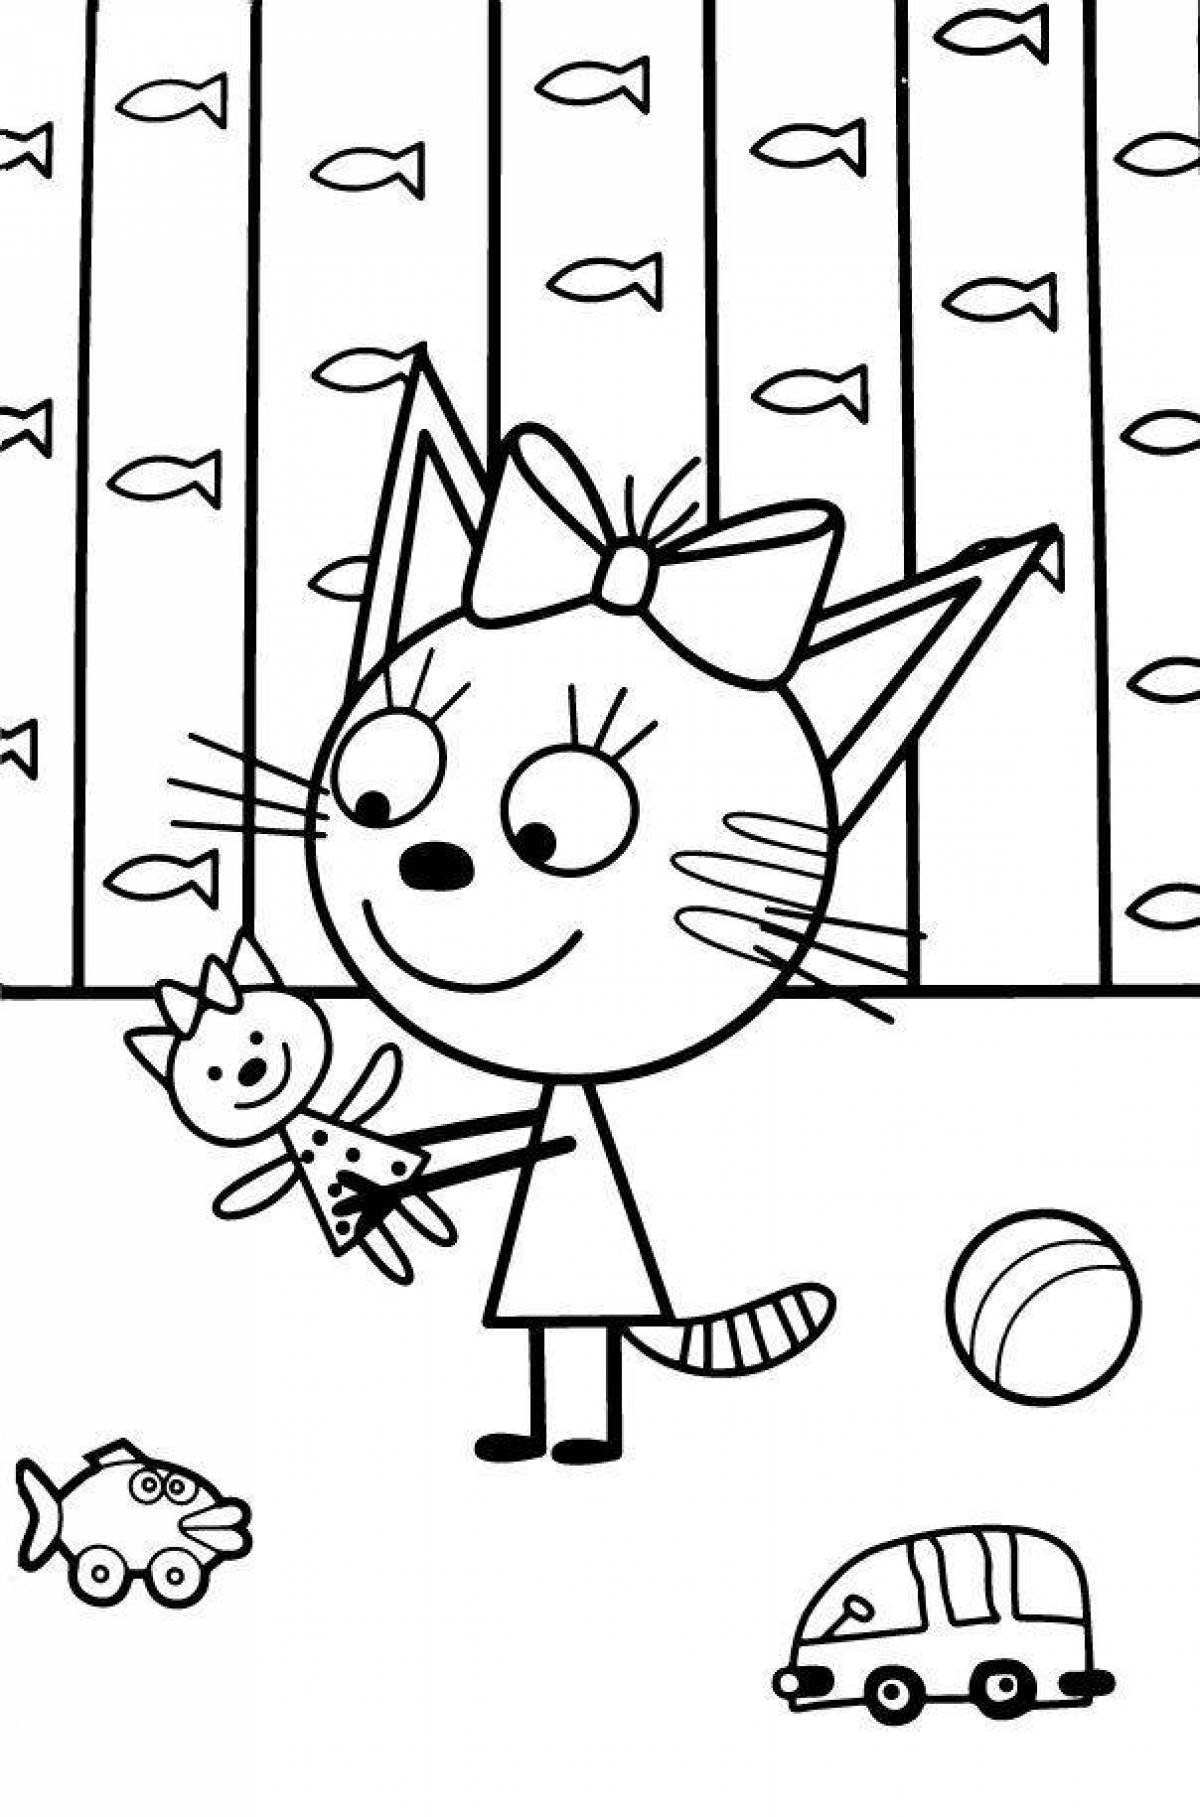 Fun three cats game coloring page